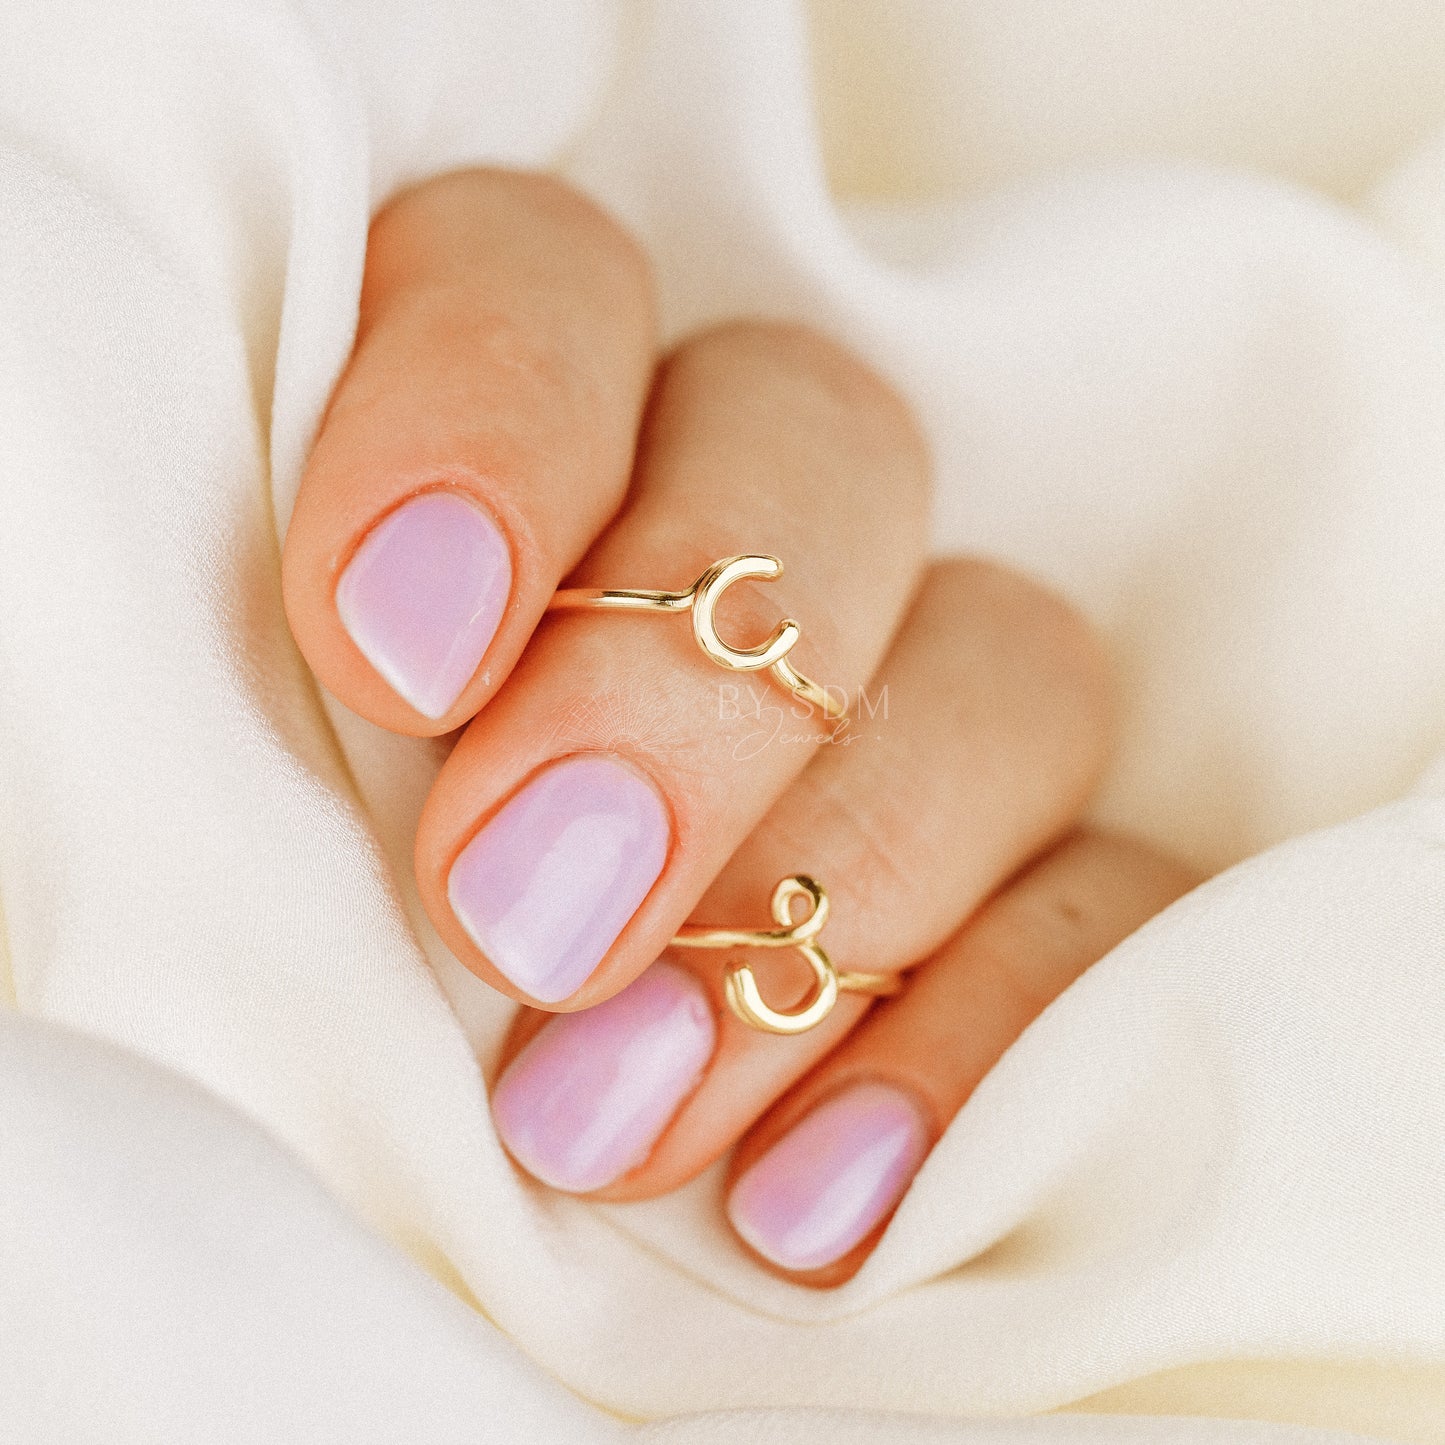 Dainty Initial C Ring • Personalized Initial Ring • Initial Name Ring • Adjustable Initial Ring • Custom Bridesmaid Gift • BYSDMJEWELS